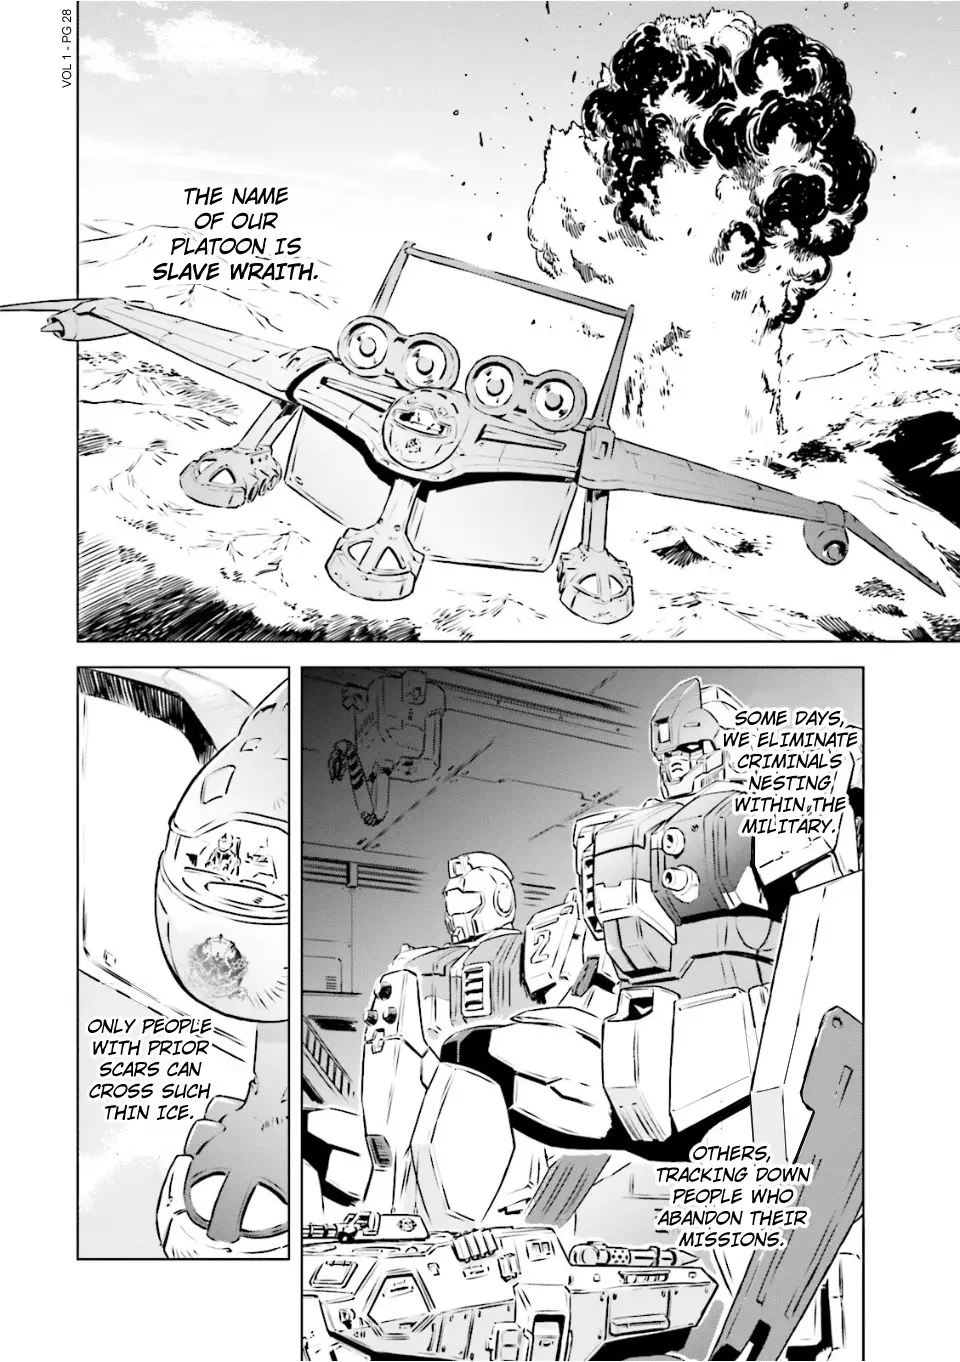 Mobile Suit Gundam Side Story - Missing Link - 1 page 18-a2833d10